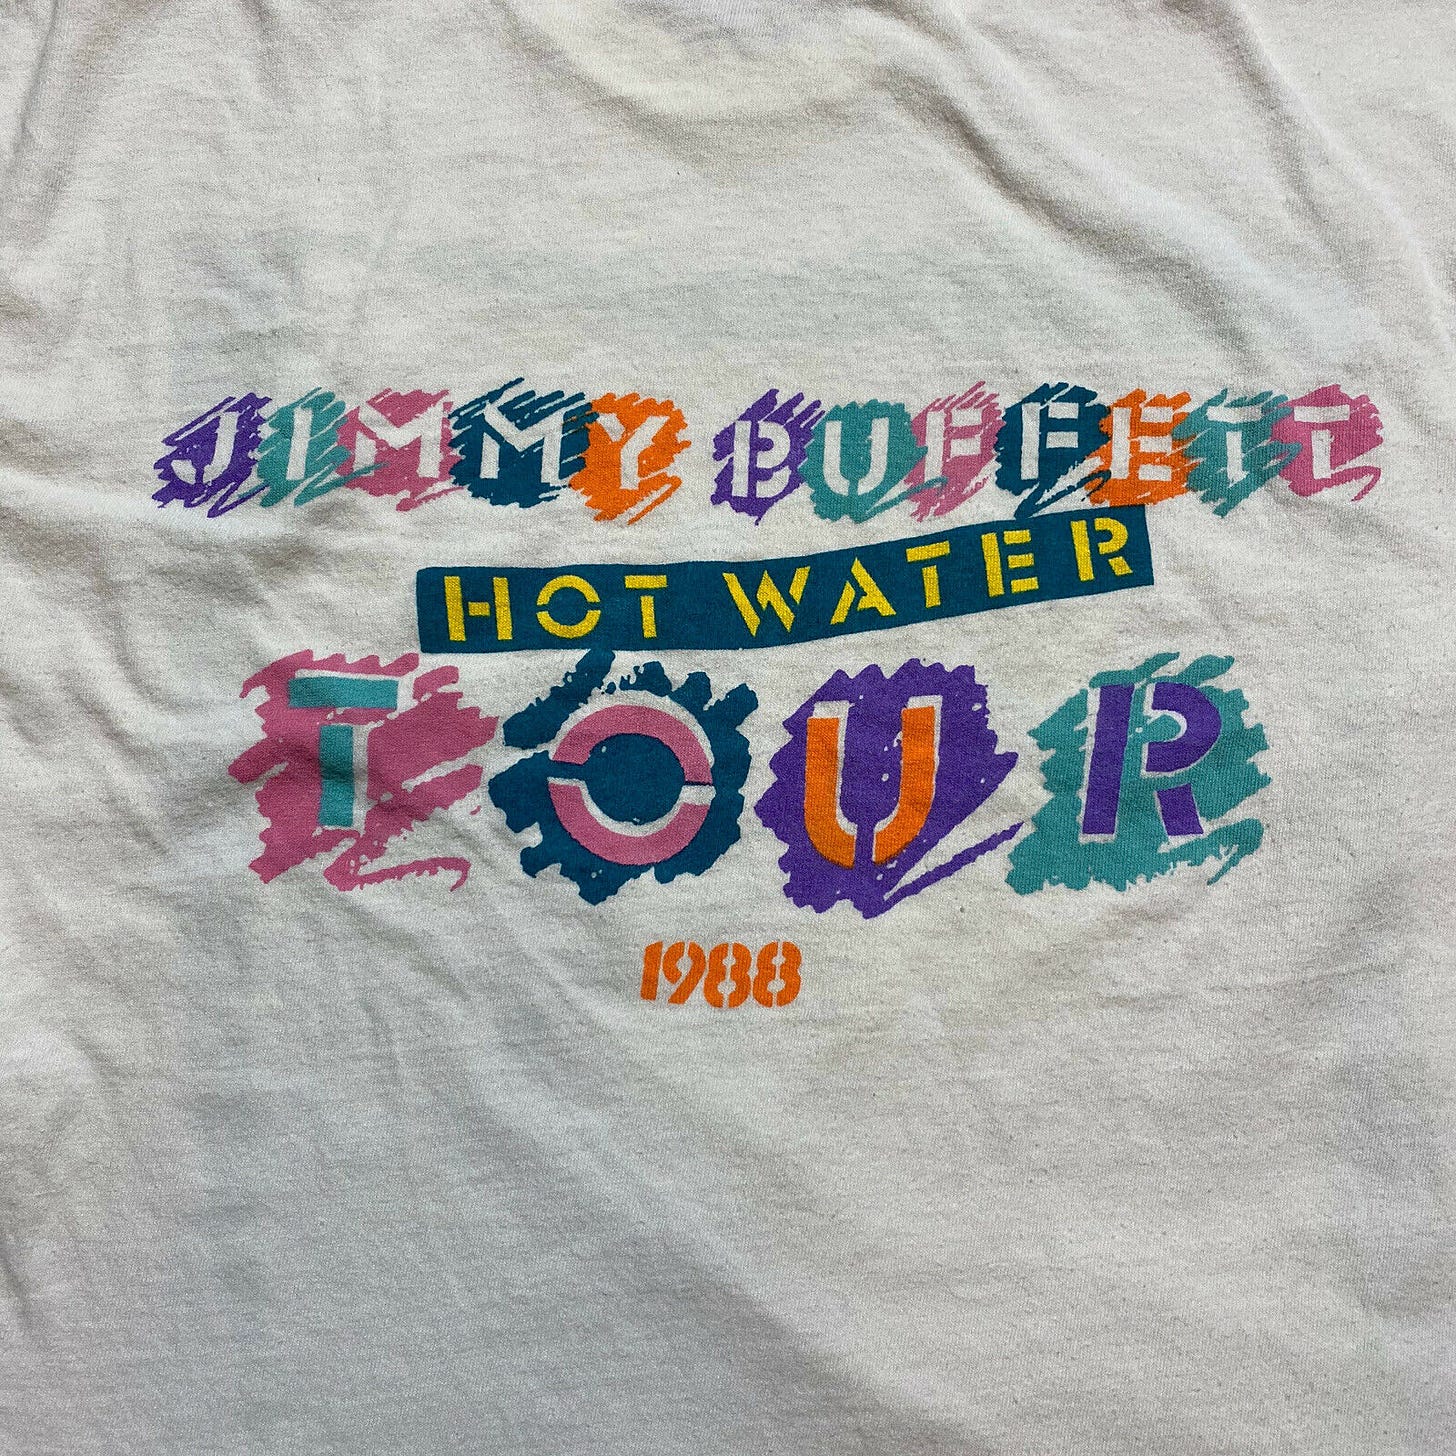 Image 31 - Jimmy Buffett Hot Water Tour 1988 T-Shirt Vtg 80s Coral Reefer Parrothead Tee